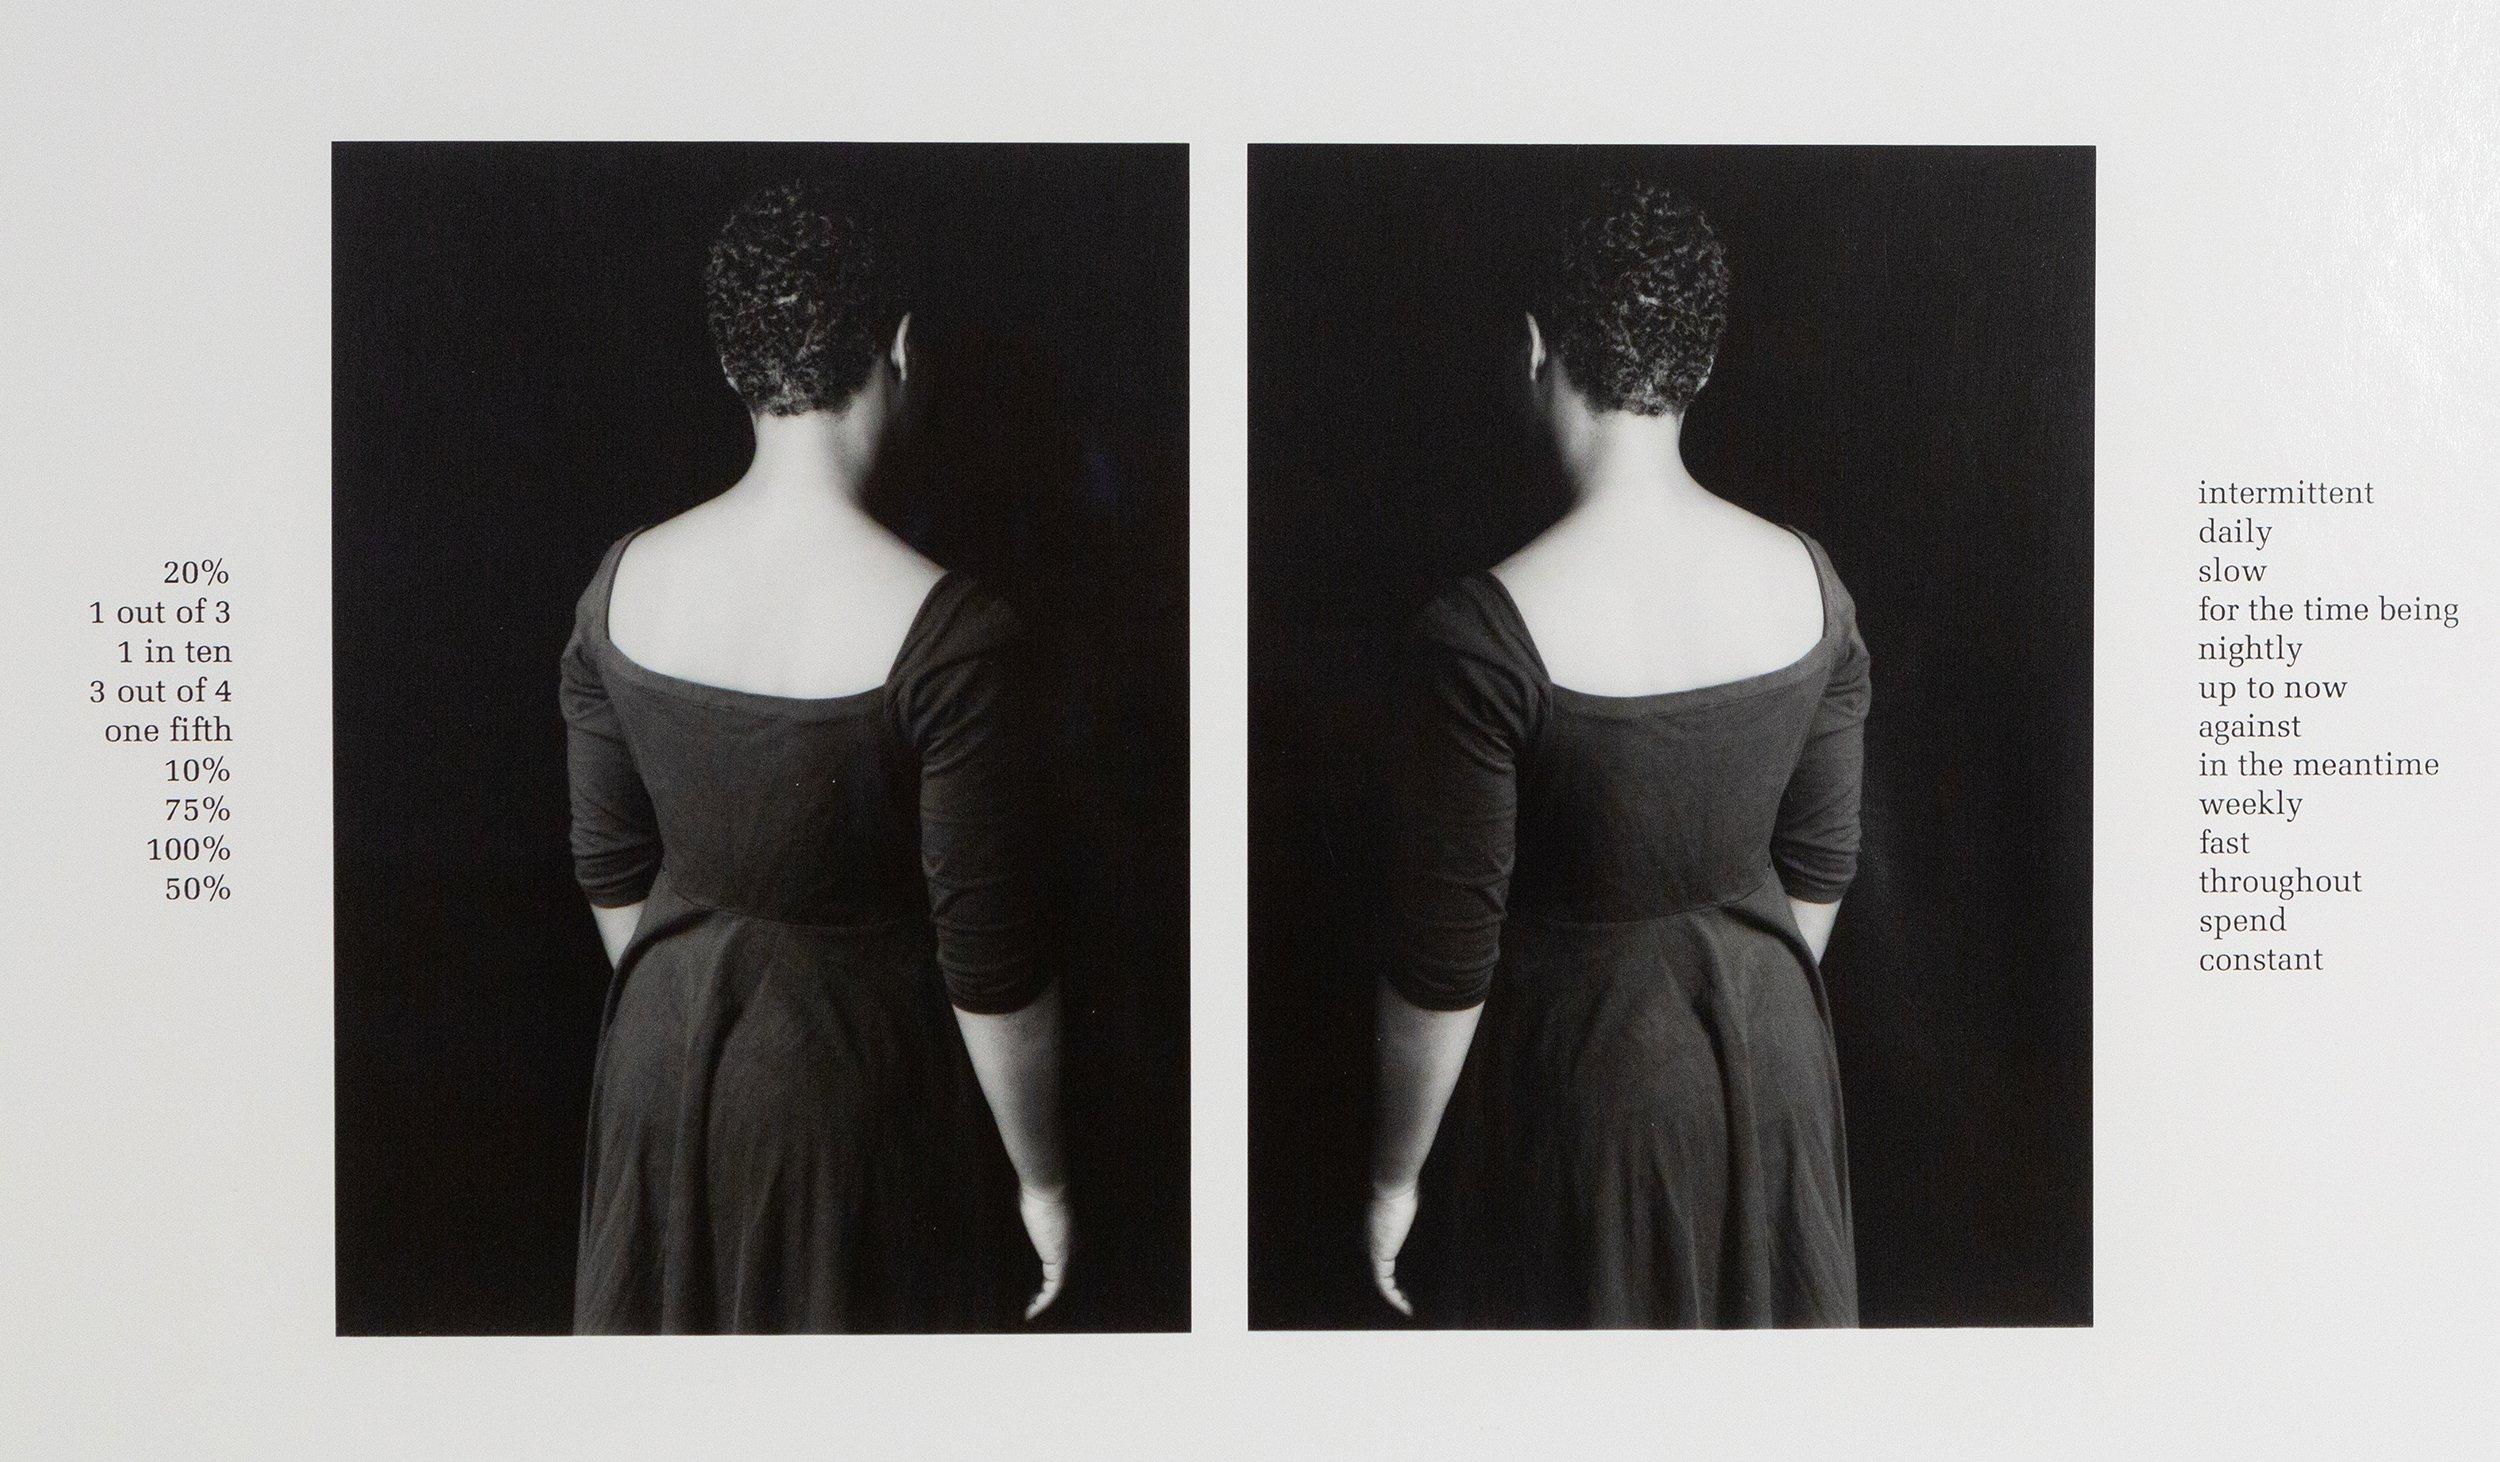 Partition and Time - Conceptual Photograph by Lorna Simpson